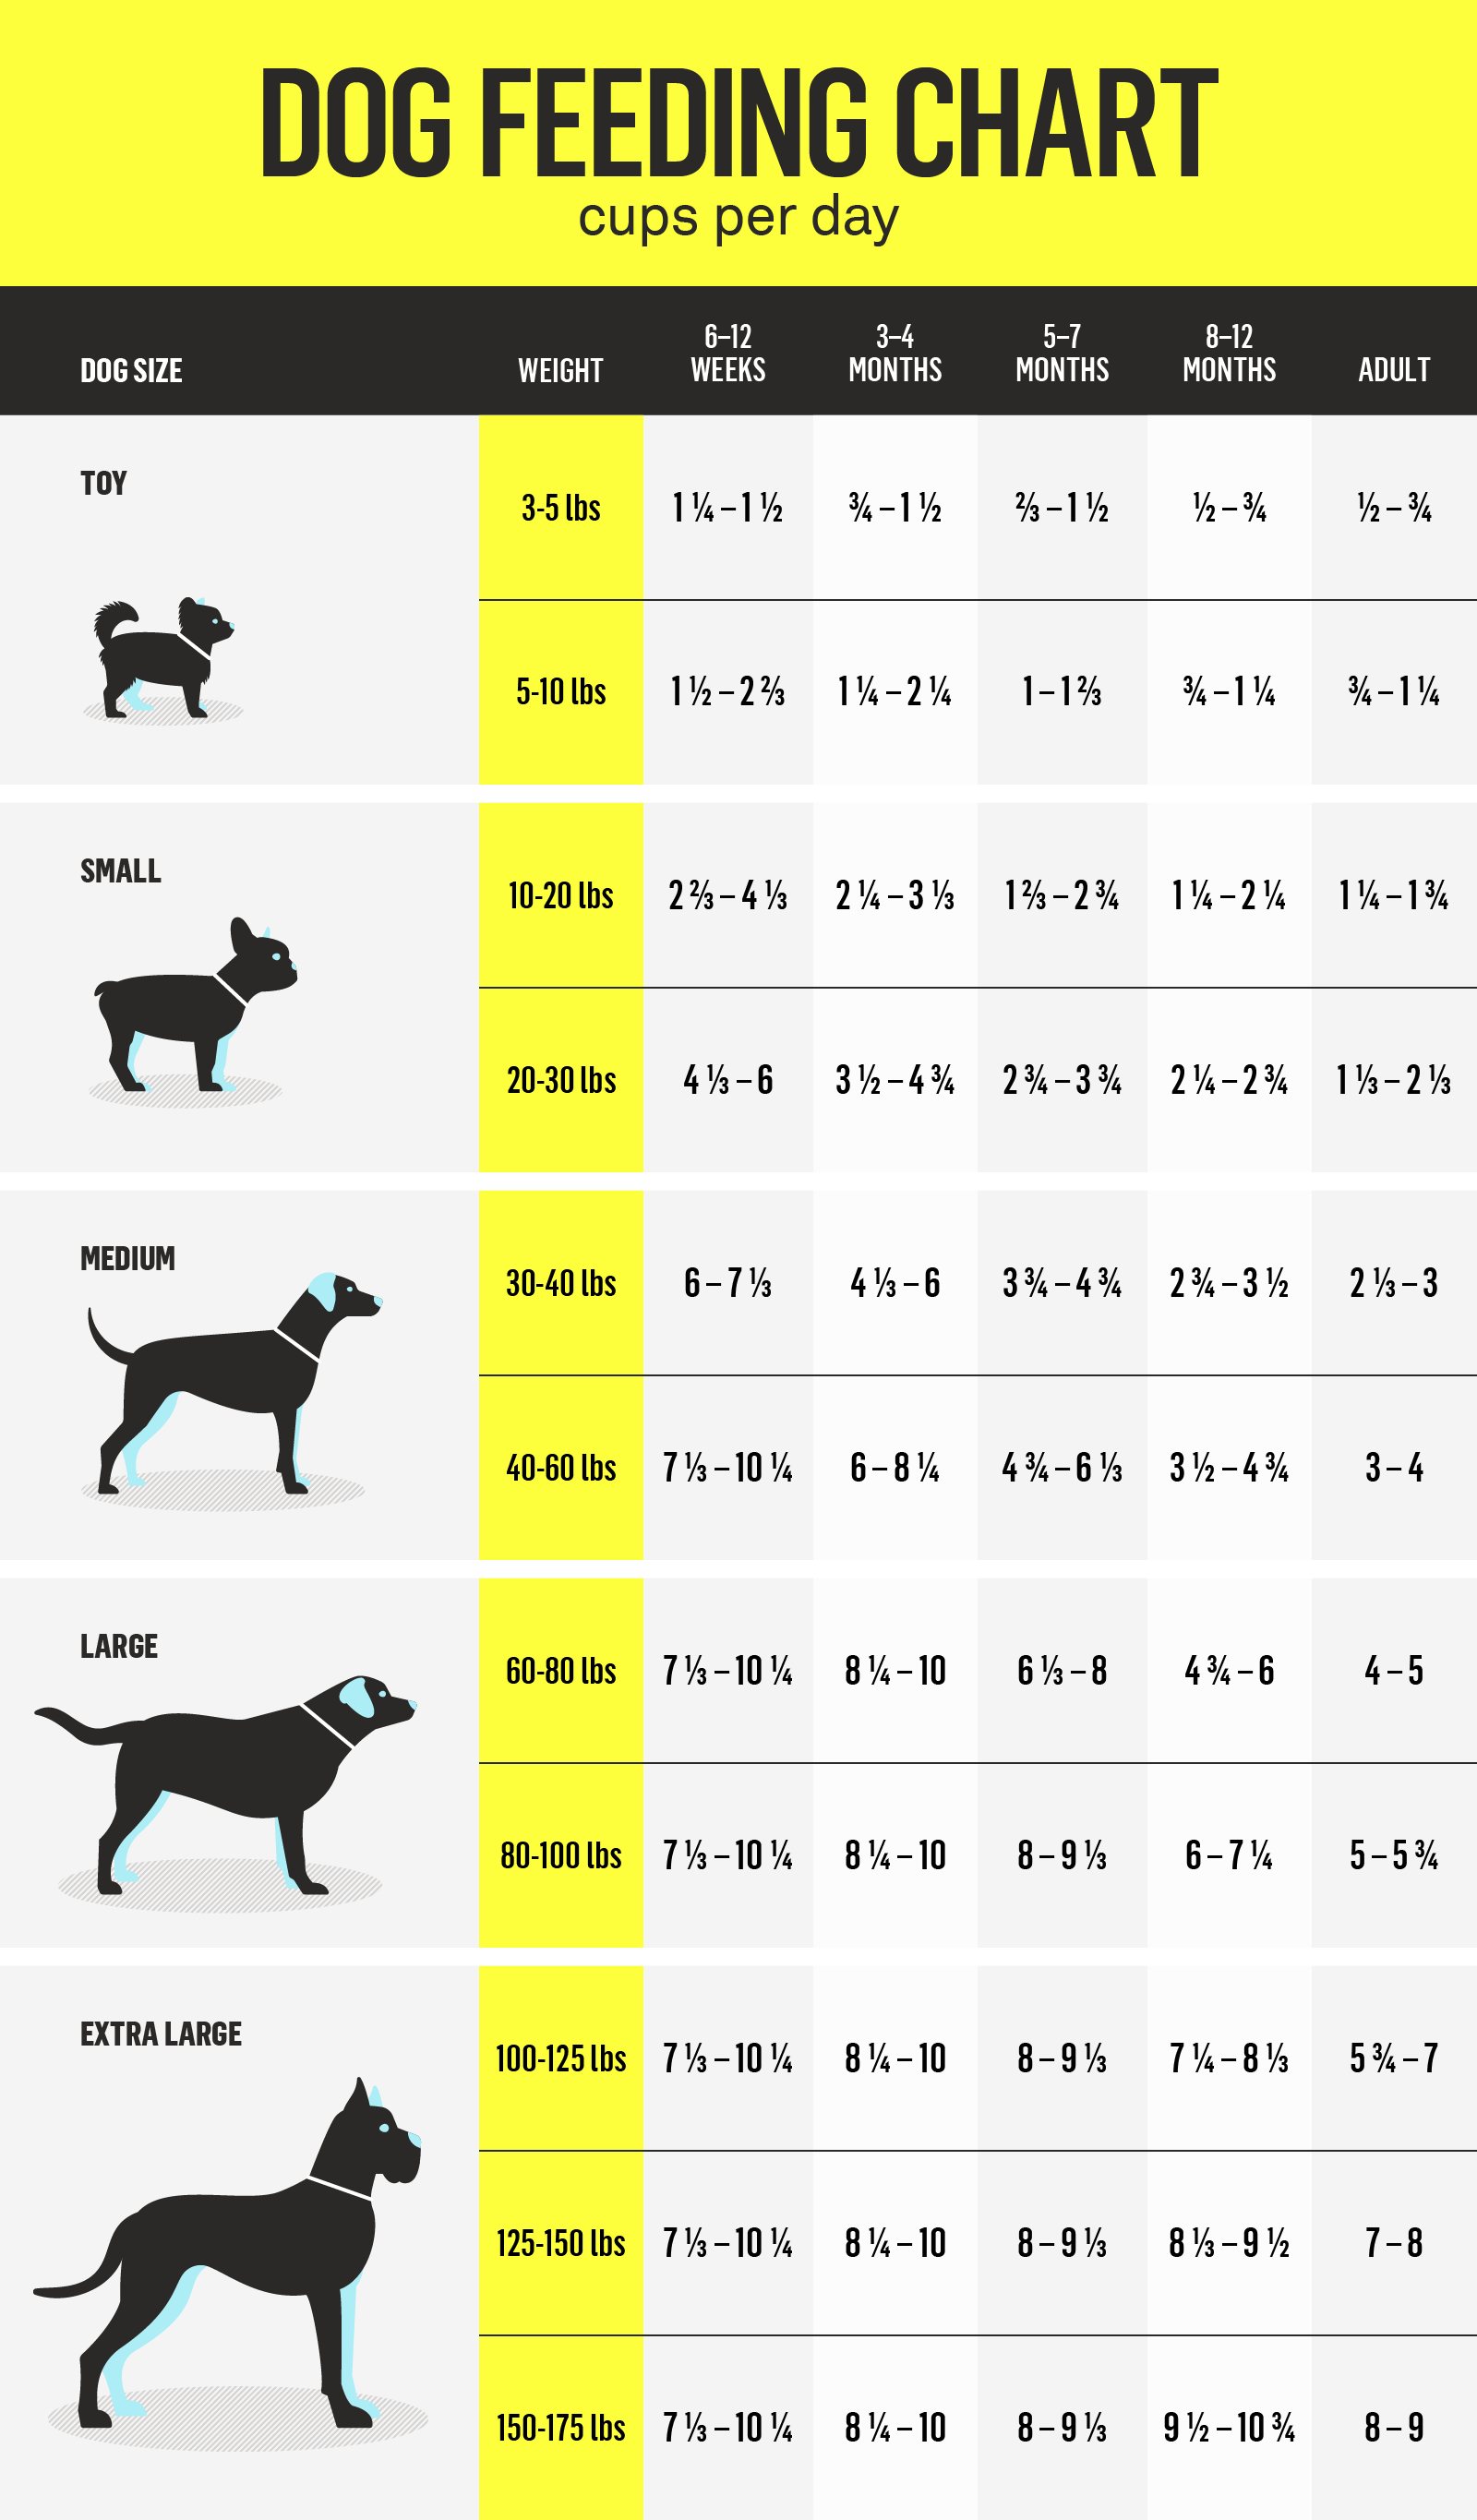 How Much Food Should I Feed My Dog Chart?